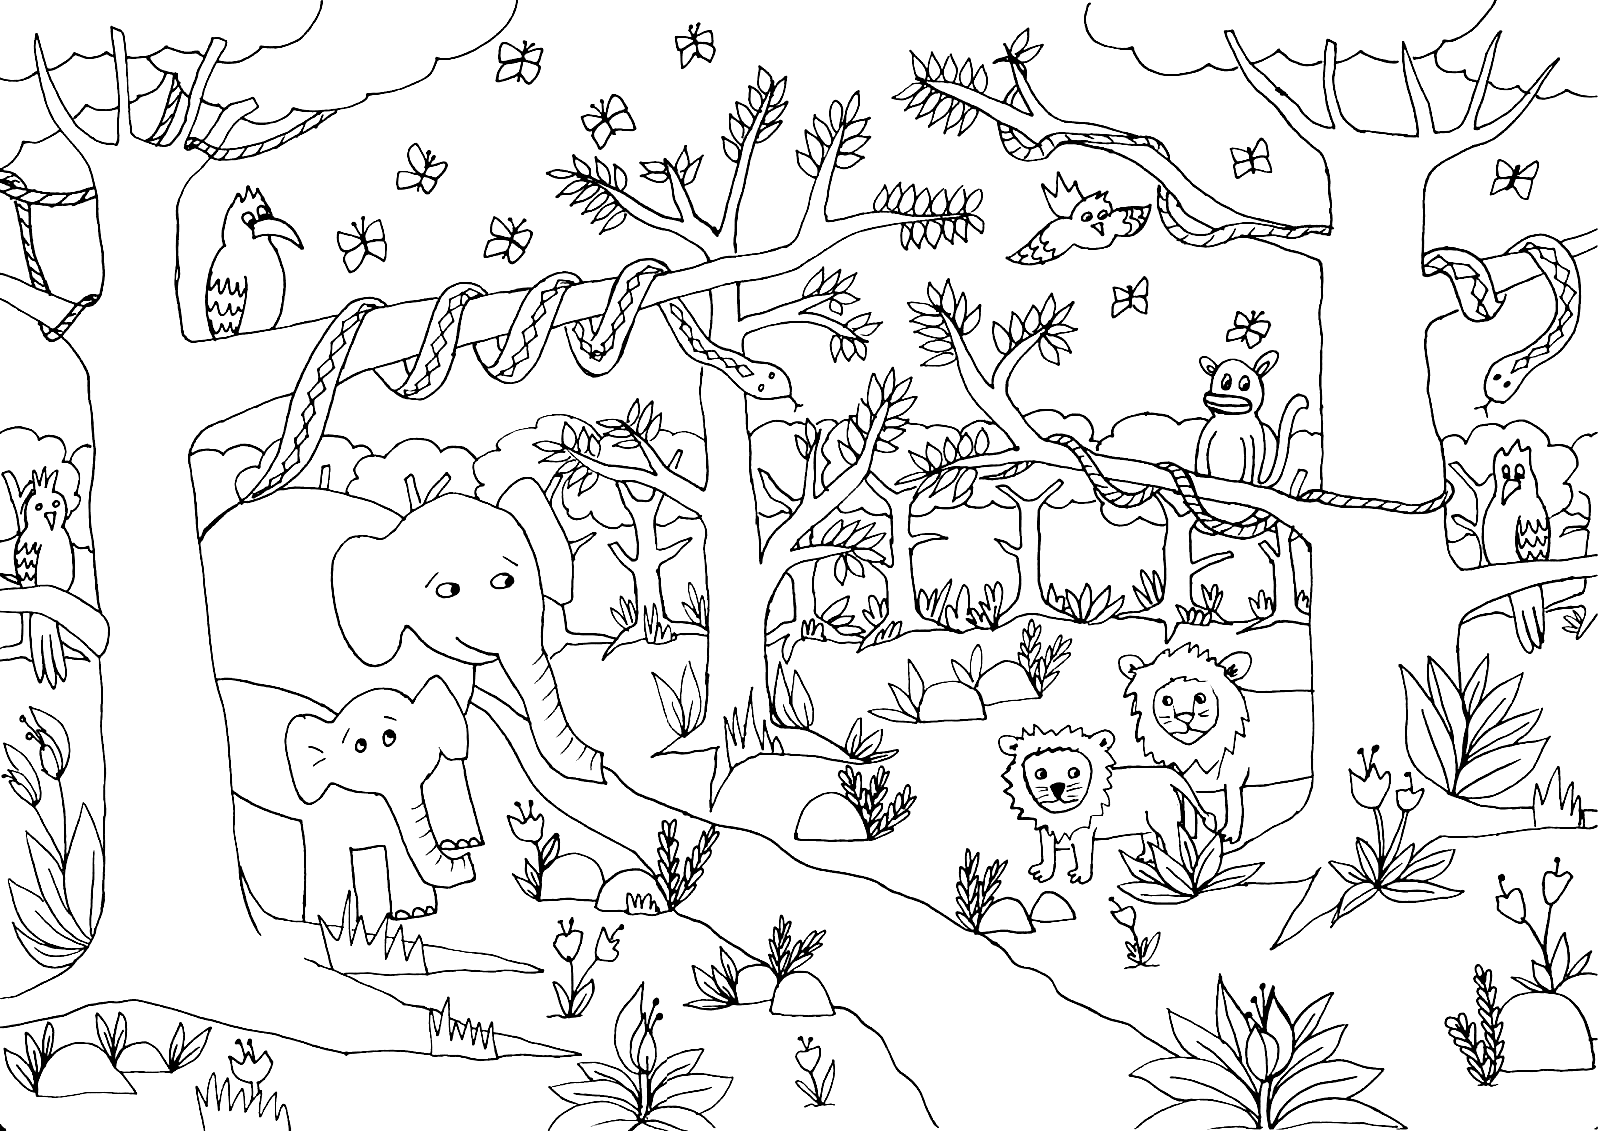 Tropical Animals and Birds Coloring Page